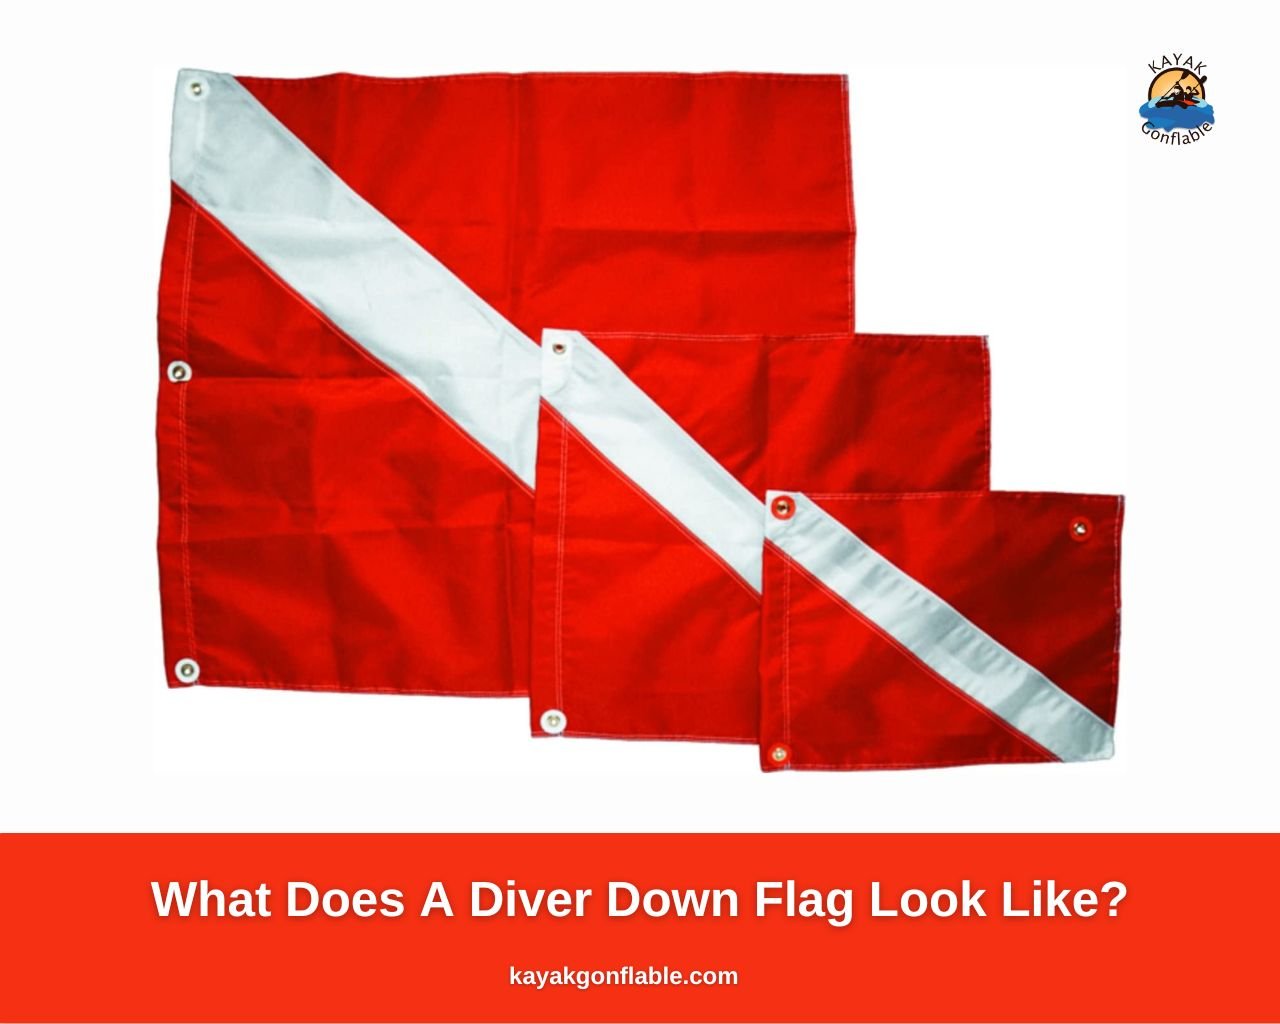 What Does A Diver Down Flag Look Like